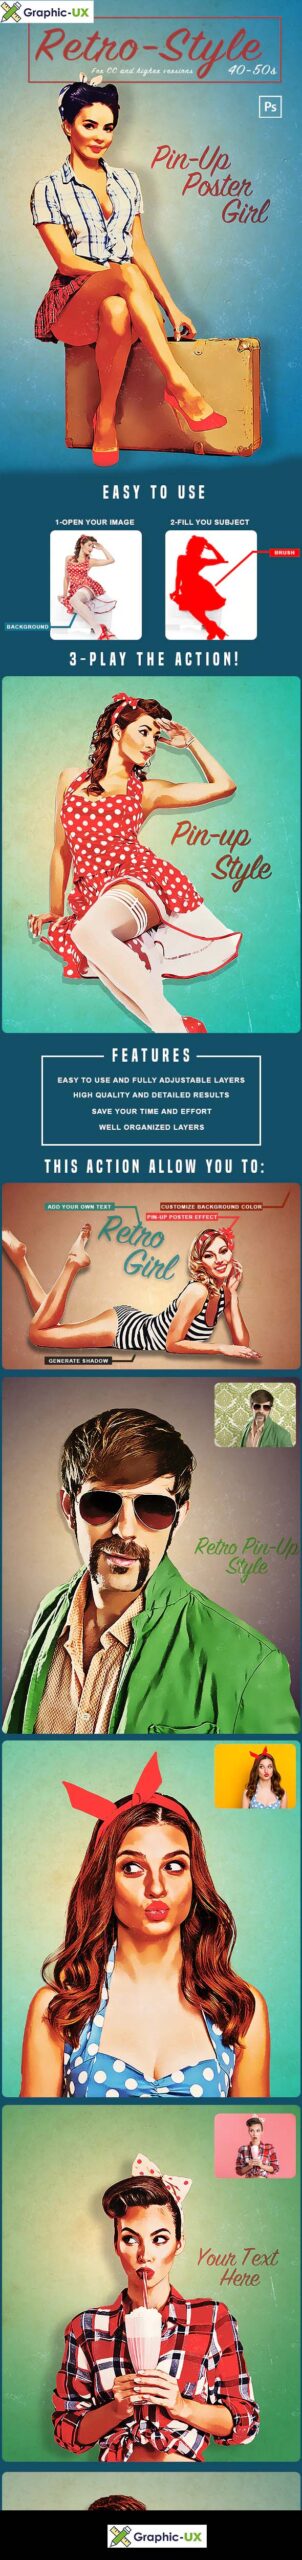 Retro Pin-up Poster Photoshop Action